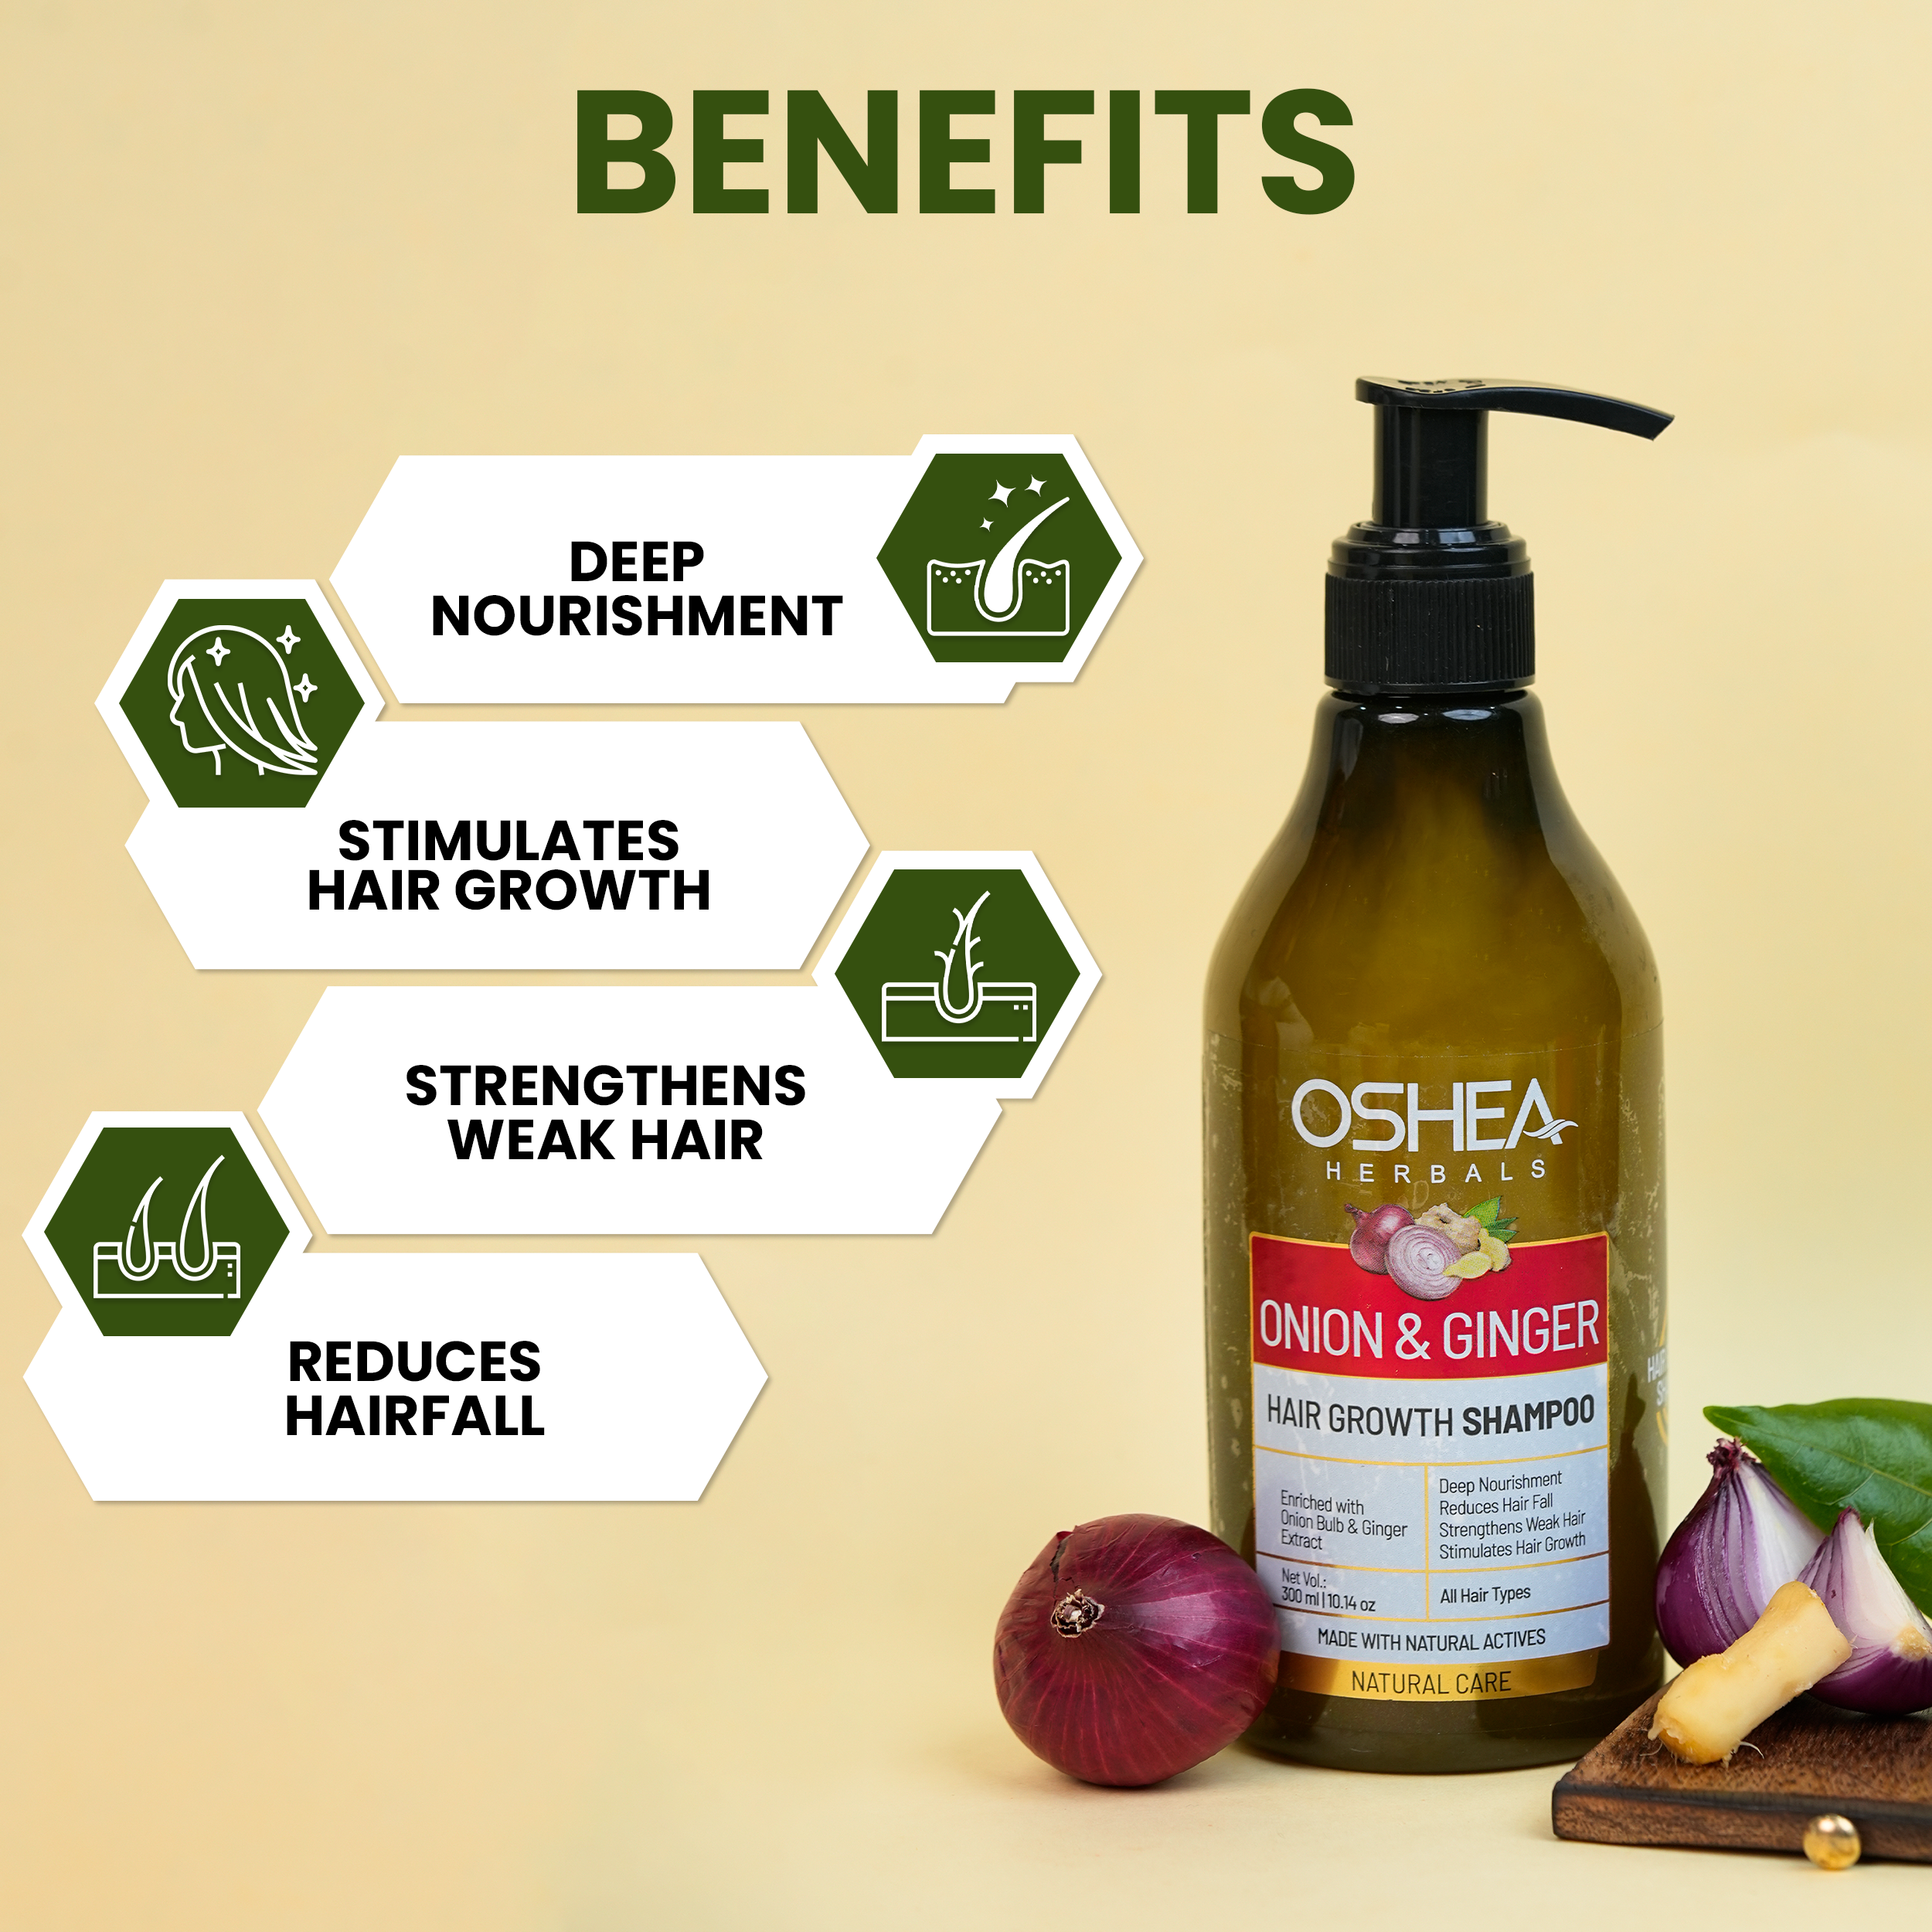  Benefits Onion And Ginger Hair Growth Shampoo Oshea Herbals